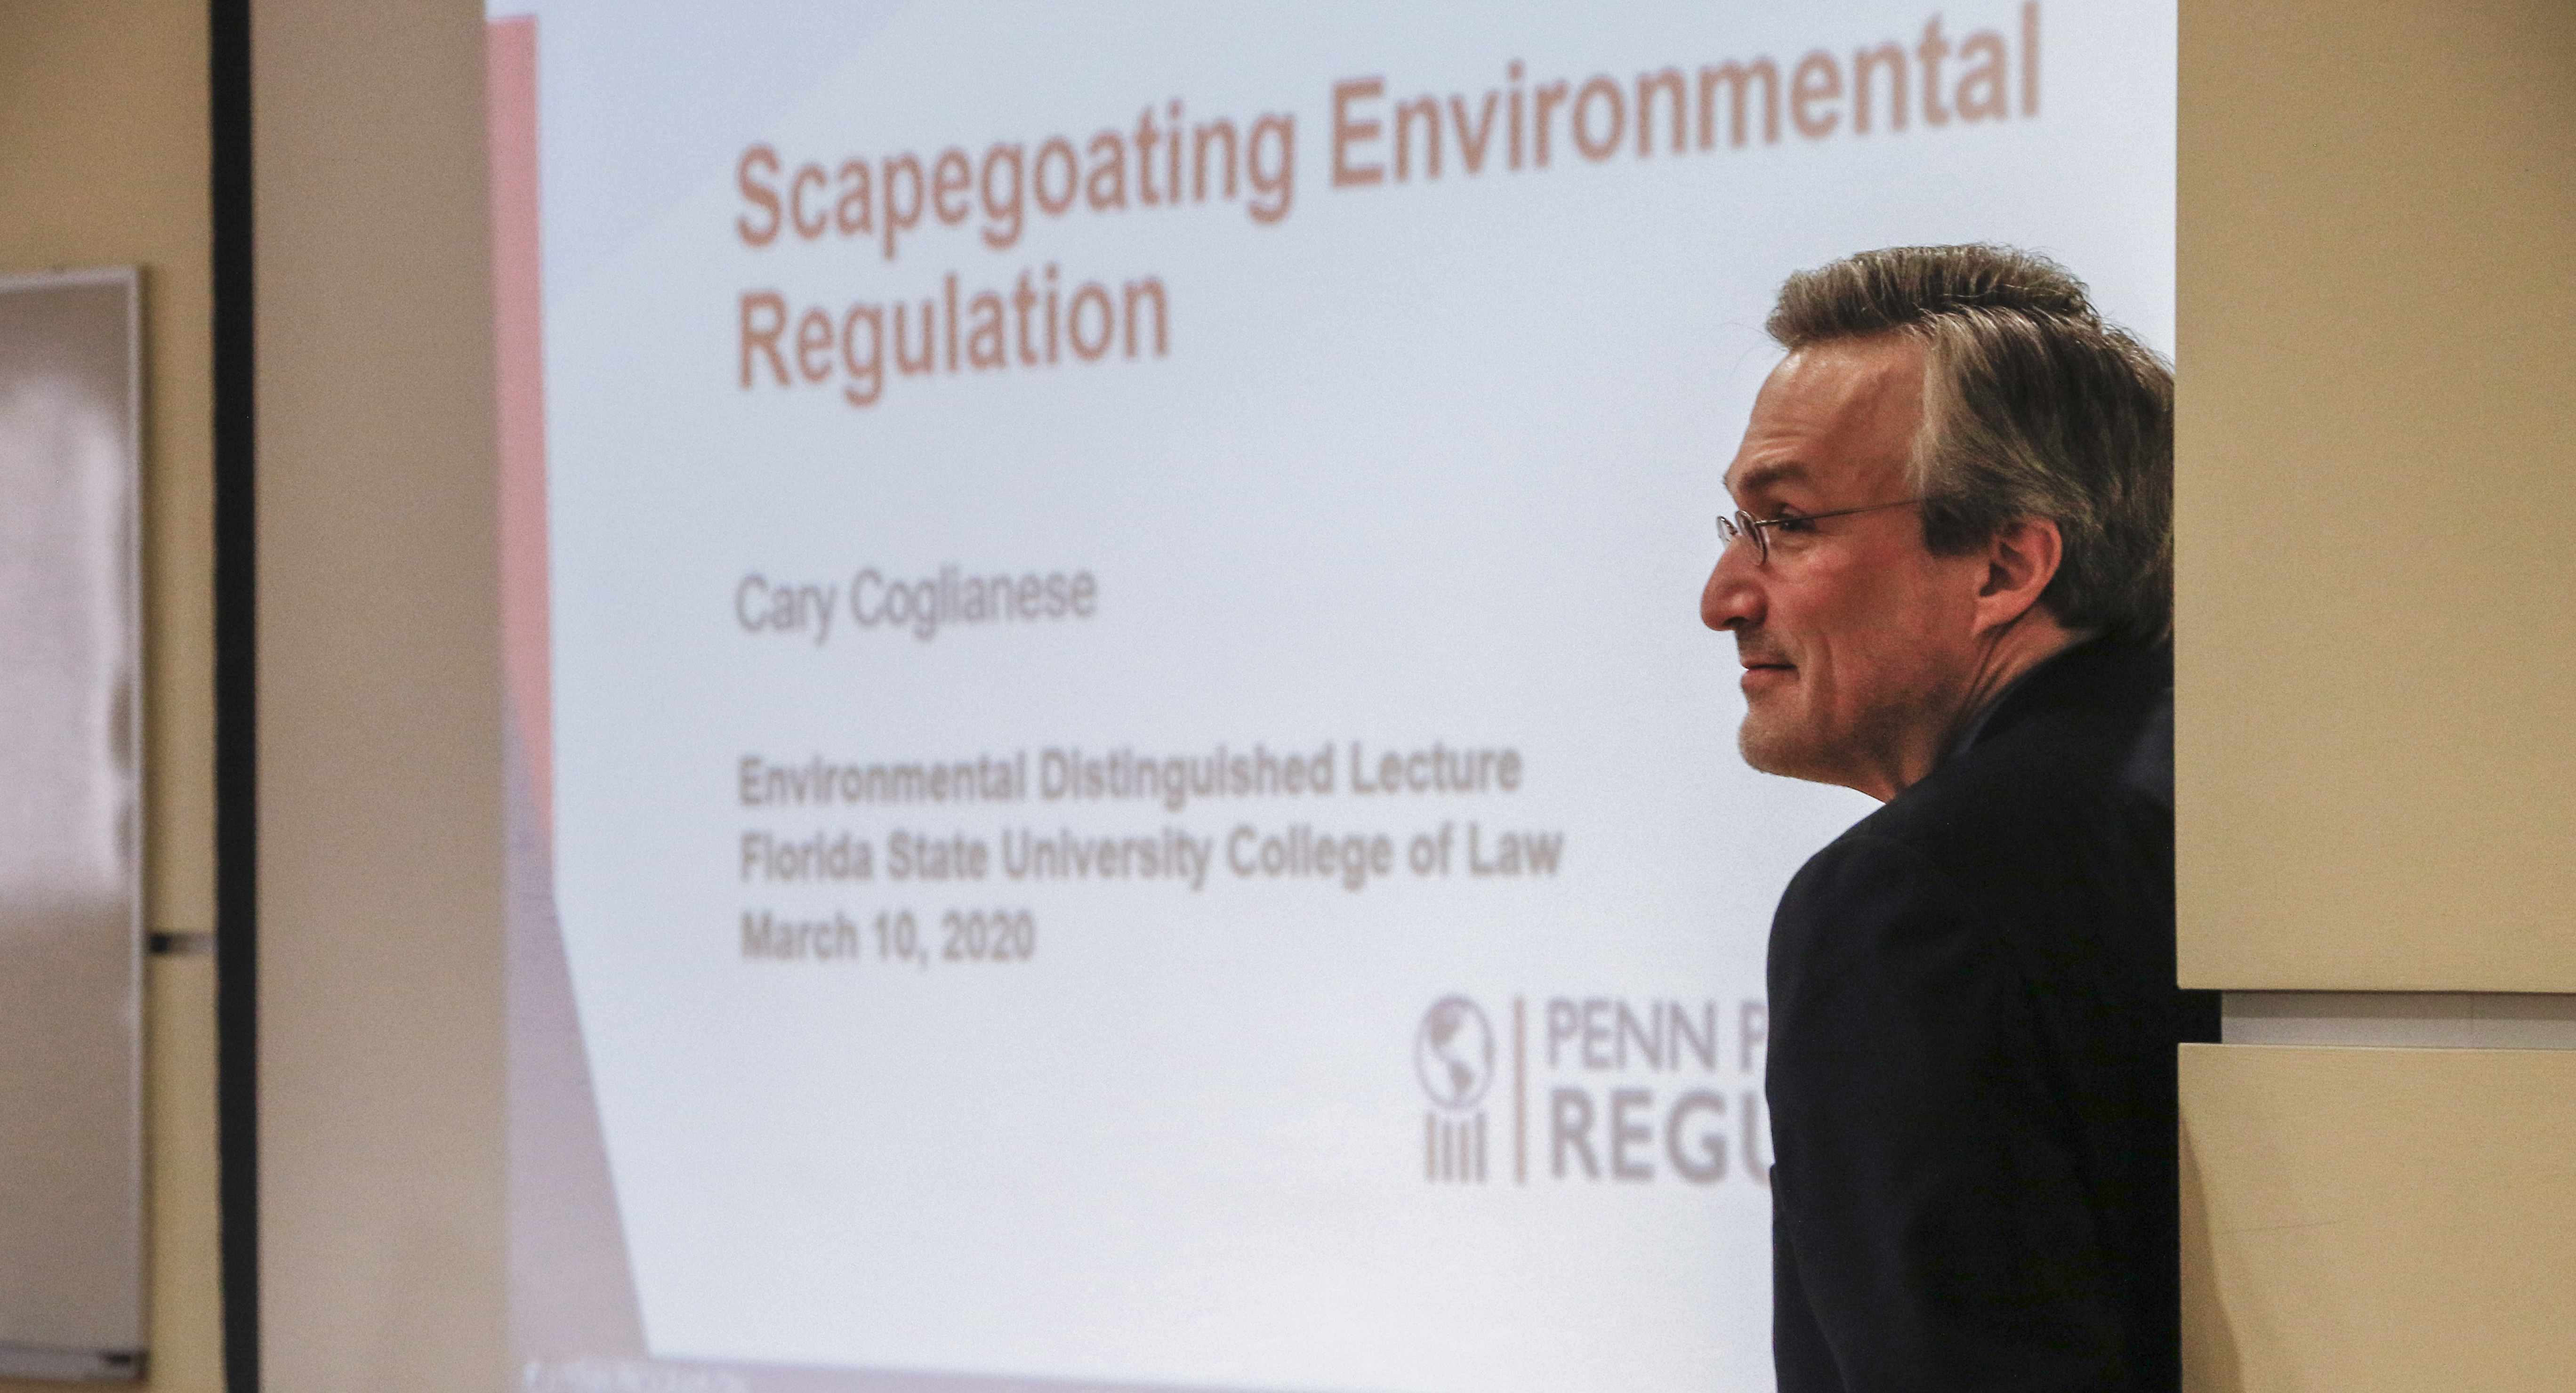 Cary Coglianese at the 2020 Lecture